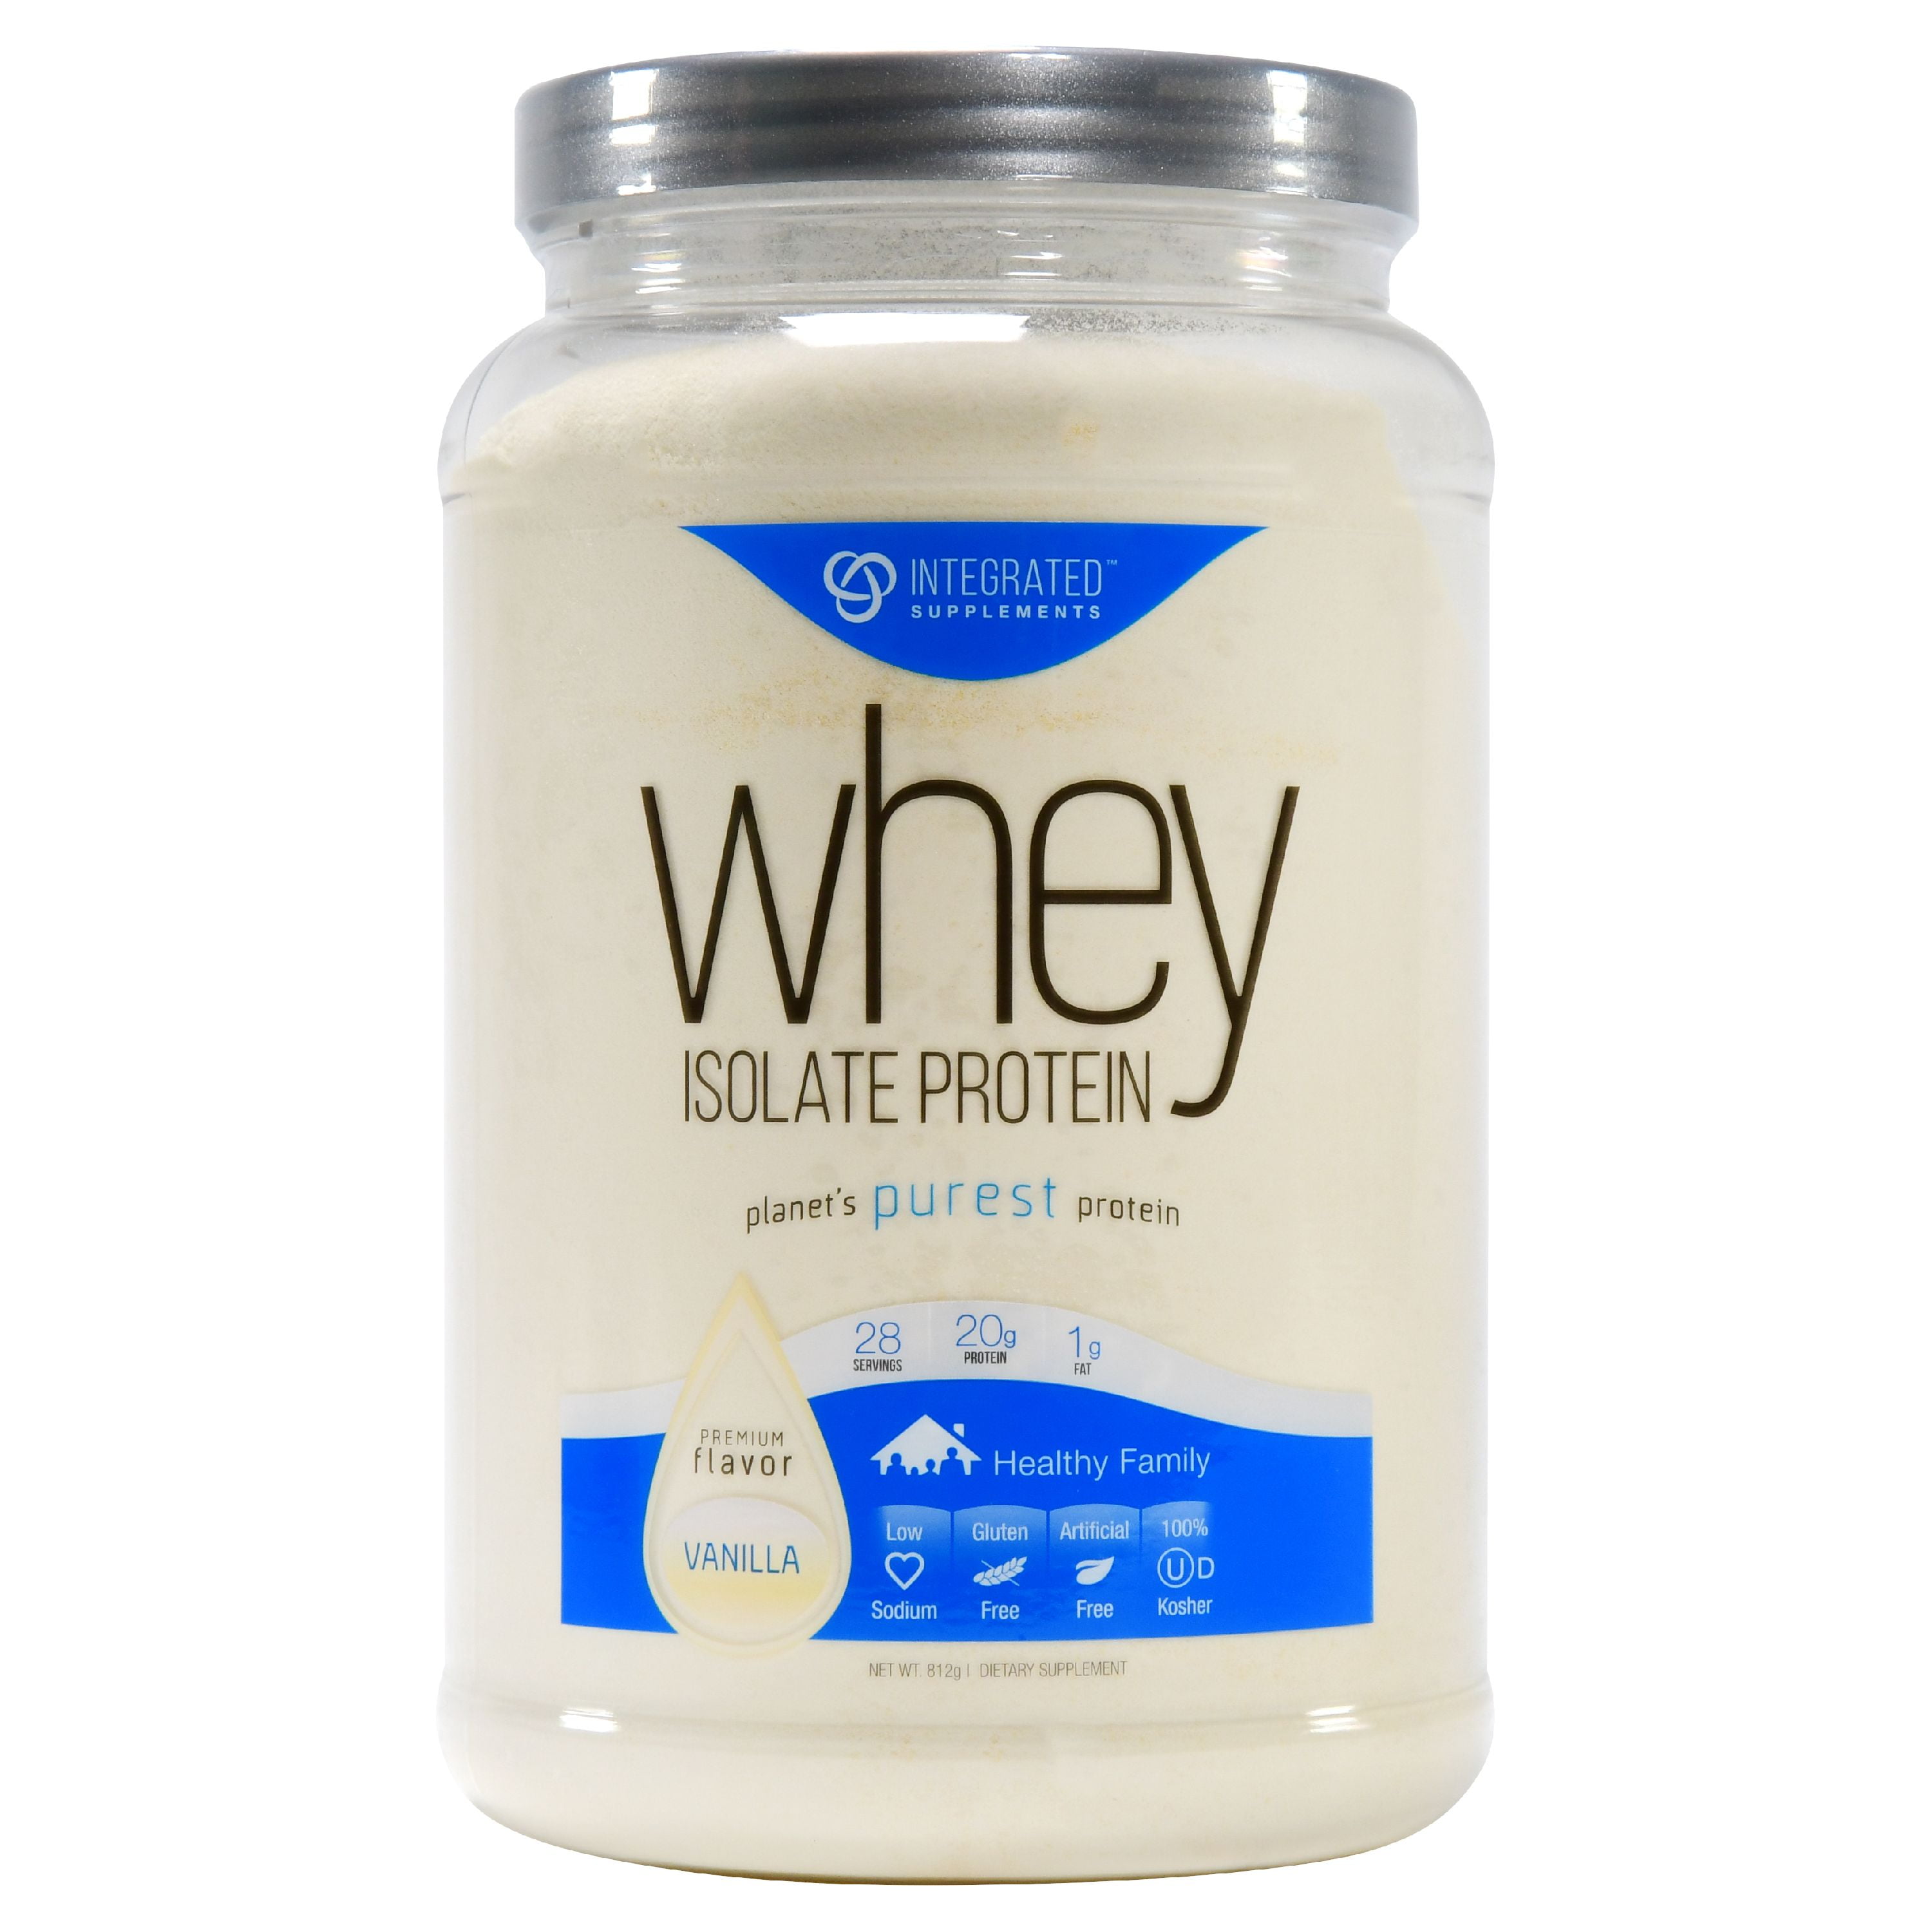 Integrated Supplements Whey Isolate Protein Powder, Vanilla, 20g Protein, 1.8lb, 28.6oz